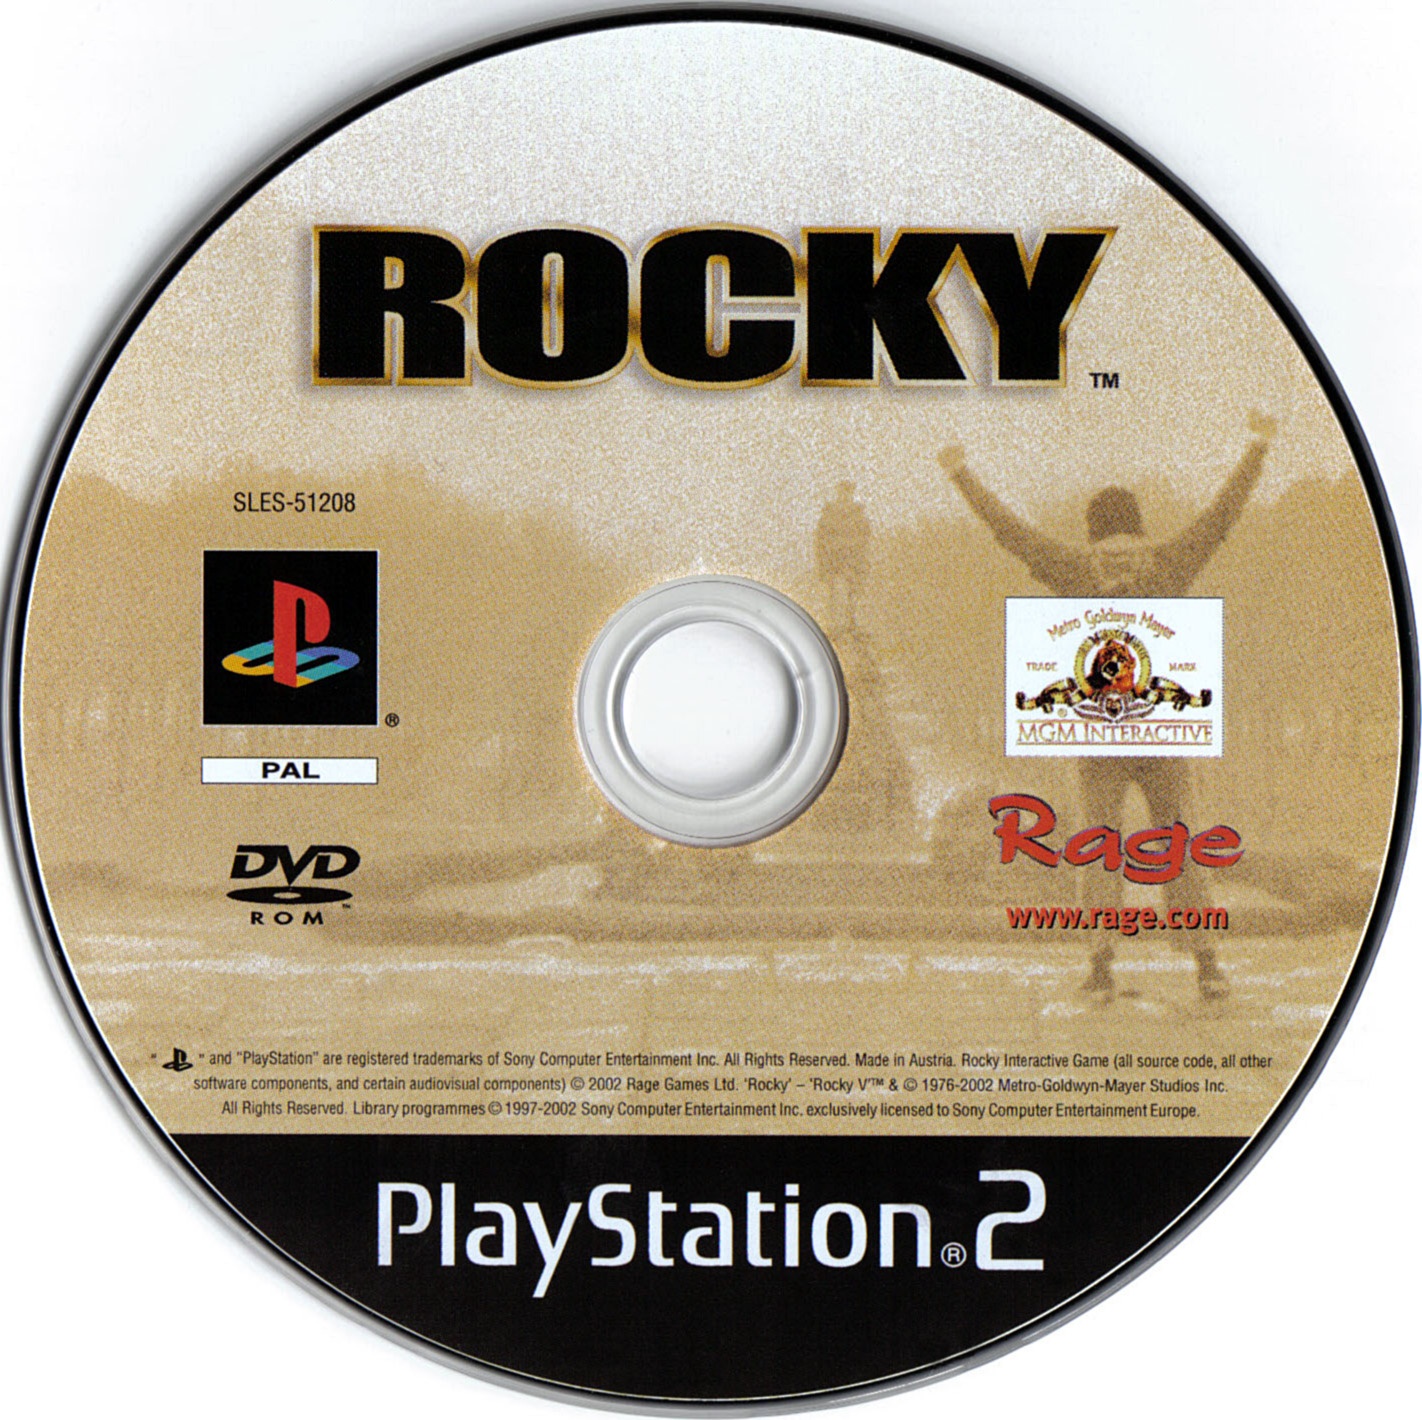 Playstation 2 русский язык. Rocky Legends ps2 обложка. Rocky 2002 ps2 Cover. Rocky PLAYSTATION 2. PLAYSTATION 2 CD.